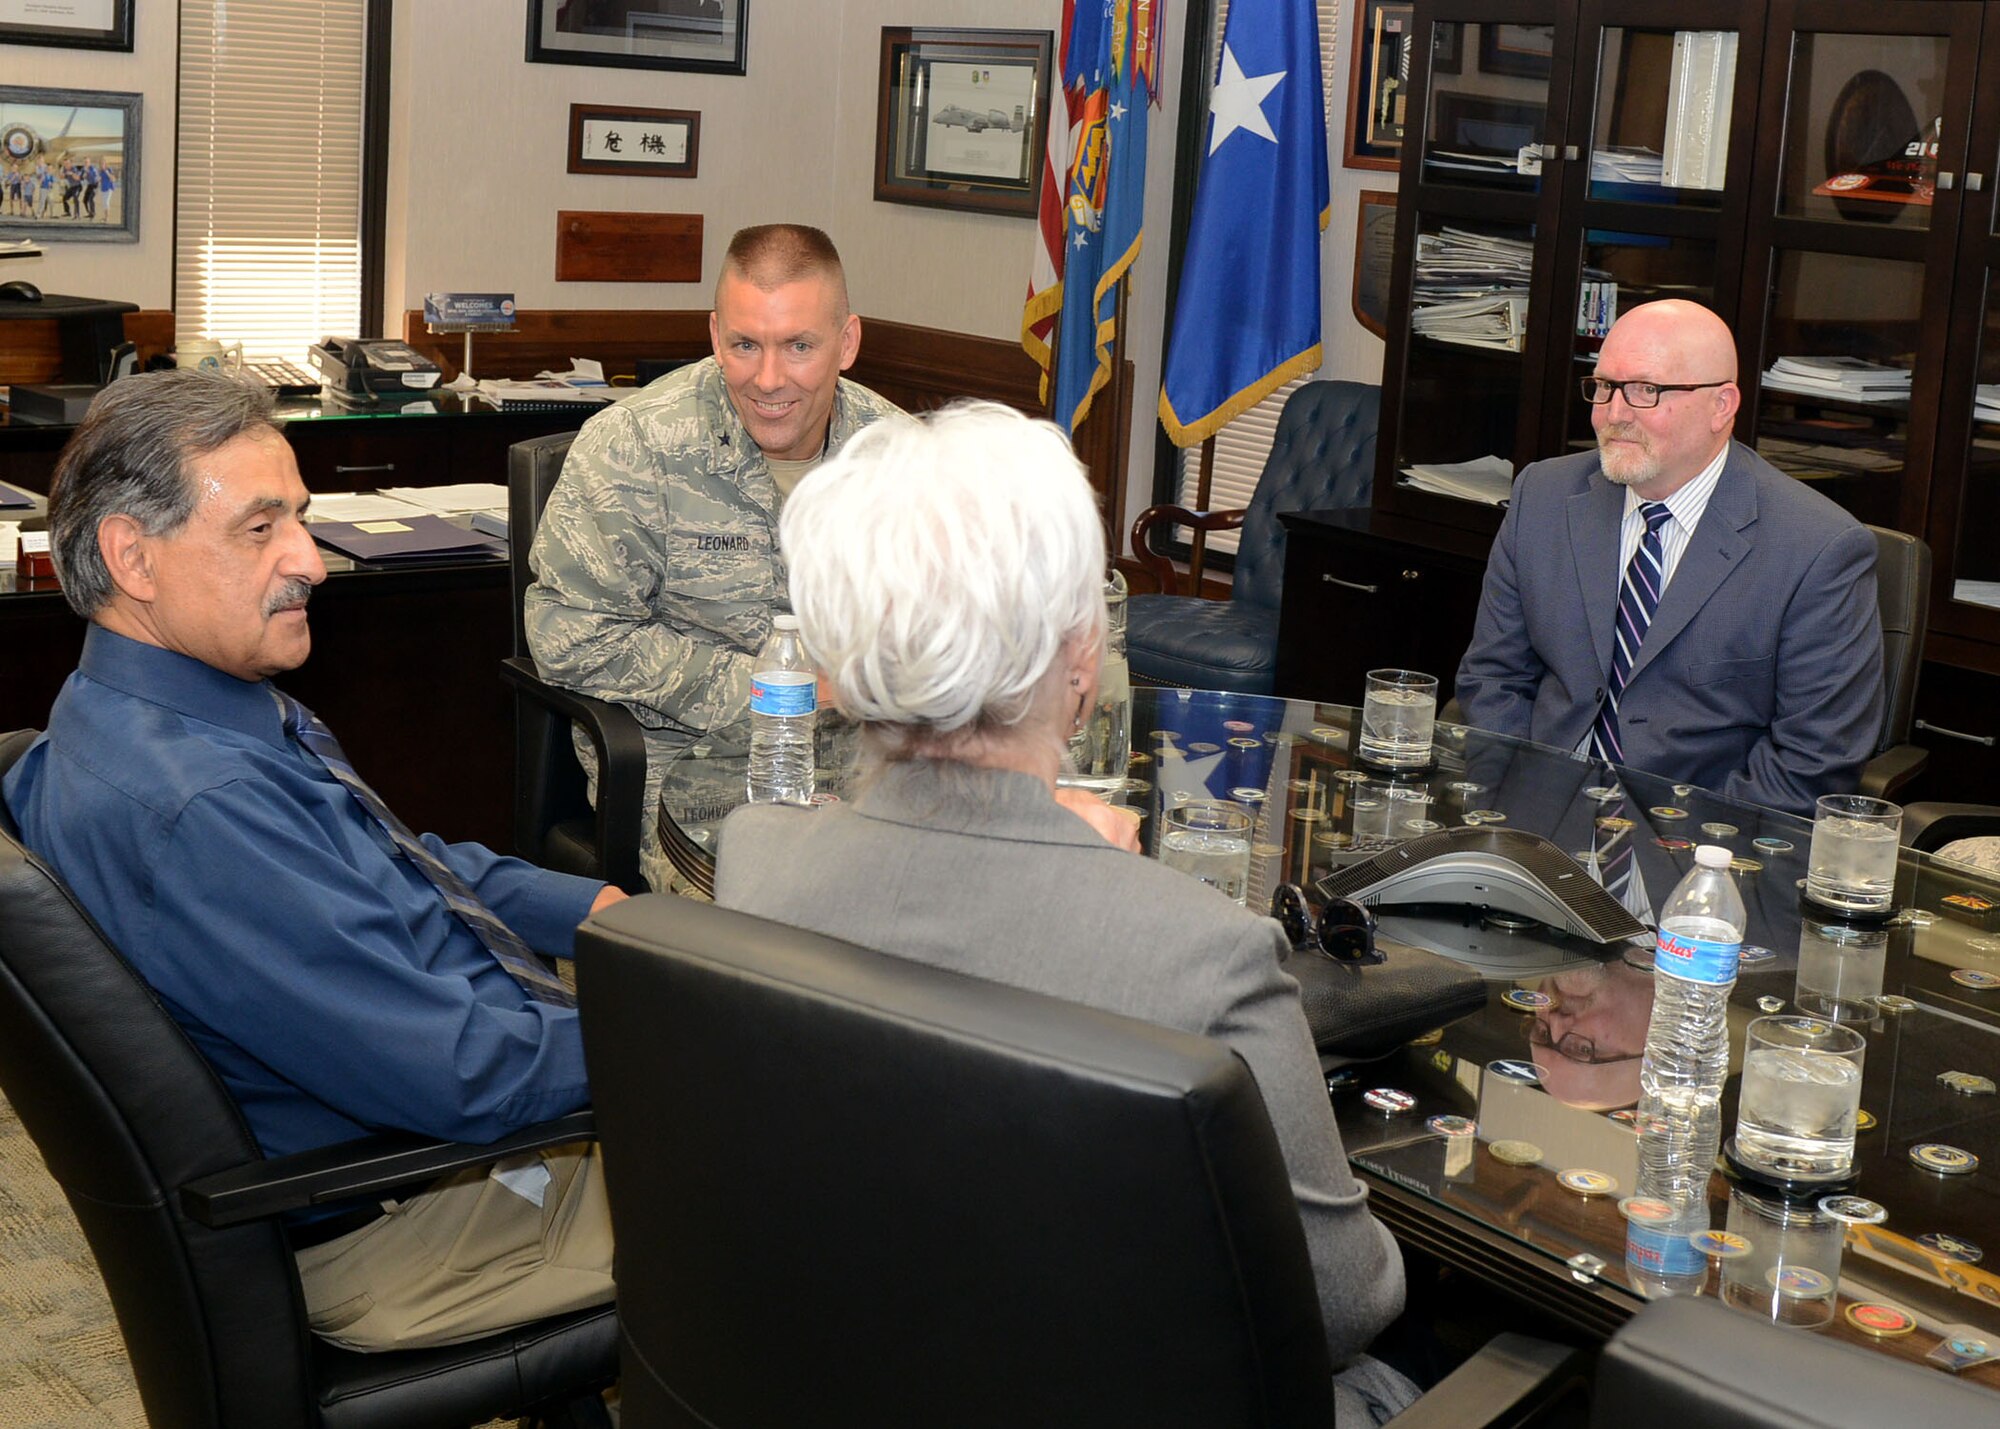 Brig. Gen. Brook Leonard, 56th Fighter Wing commander, talks with Sherry and Nick Fresques at Luke Air Force Base, Ariz., Aug. 18, 2017. The Fresques son Capt. Jeremy Fresques, 23rd Special Tactics Squadron special tactics officer, was killed in action in Iraq in 2005. The Fresques have become the first gold star family at Luke to apply for the Defense Biometric Identification System Card initiative allowing them access to the base and Airman and Family Readiness Center resources. (U.S. Air Force photo/Senior Airman James Hensley)